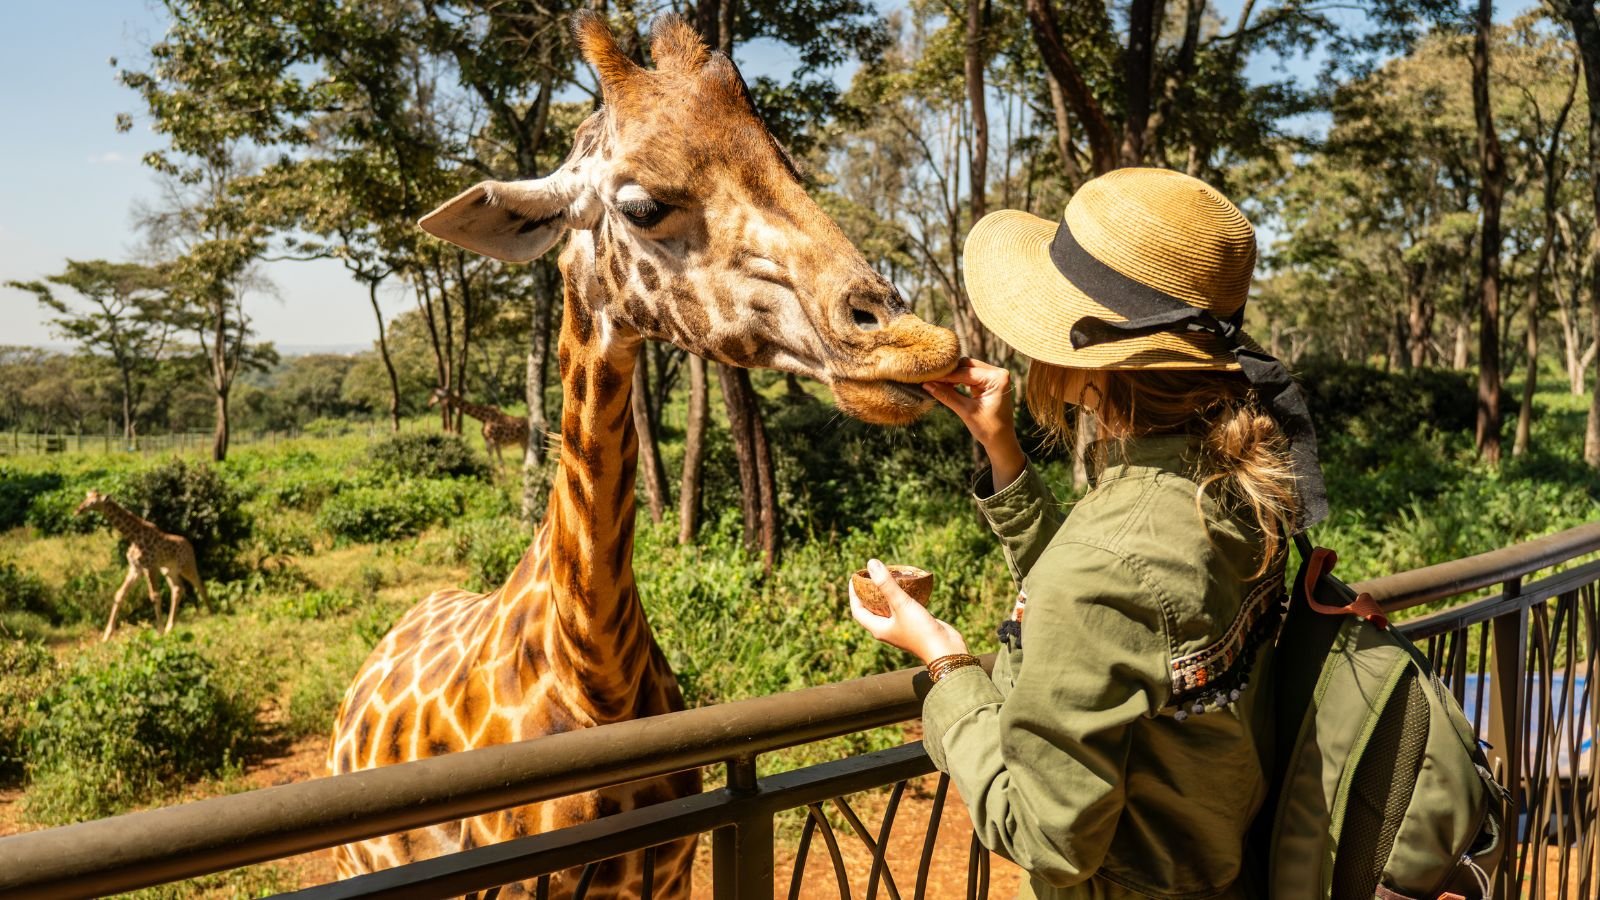 <p><a href="https://www.thesafaricollection.com/properties/giraffe-manor/" rel="noopener">Giraffe Manor</a> in Kenya is ranked seventh on the list of the world’s most photogenic hotels. It has around 119k posts on Instagram with the hashtag #giraffemanor. This boutique hotel is famous for its resident herd of endangered Rothschild giraffes. Guests at Giraffe Manor have a unique chance to learn about this rare giraffe species. Moreover, they can even snap photos with them. It’s not just a place to stay; it’s a chance for the guests to get close to some of nature’s most majestic creatures.</p>